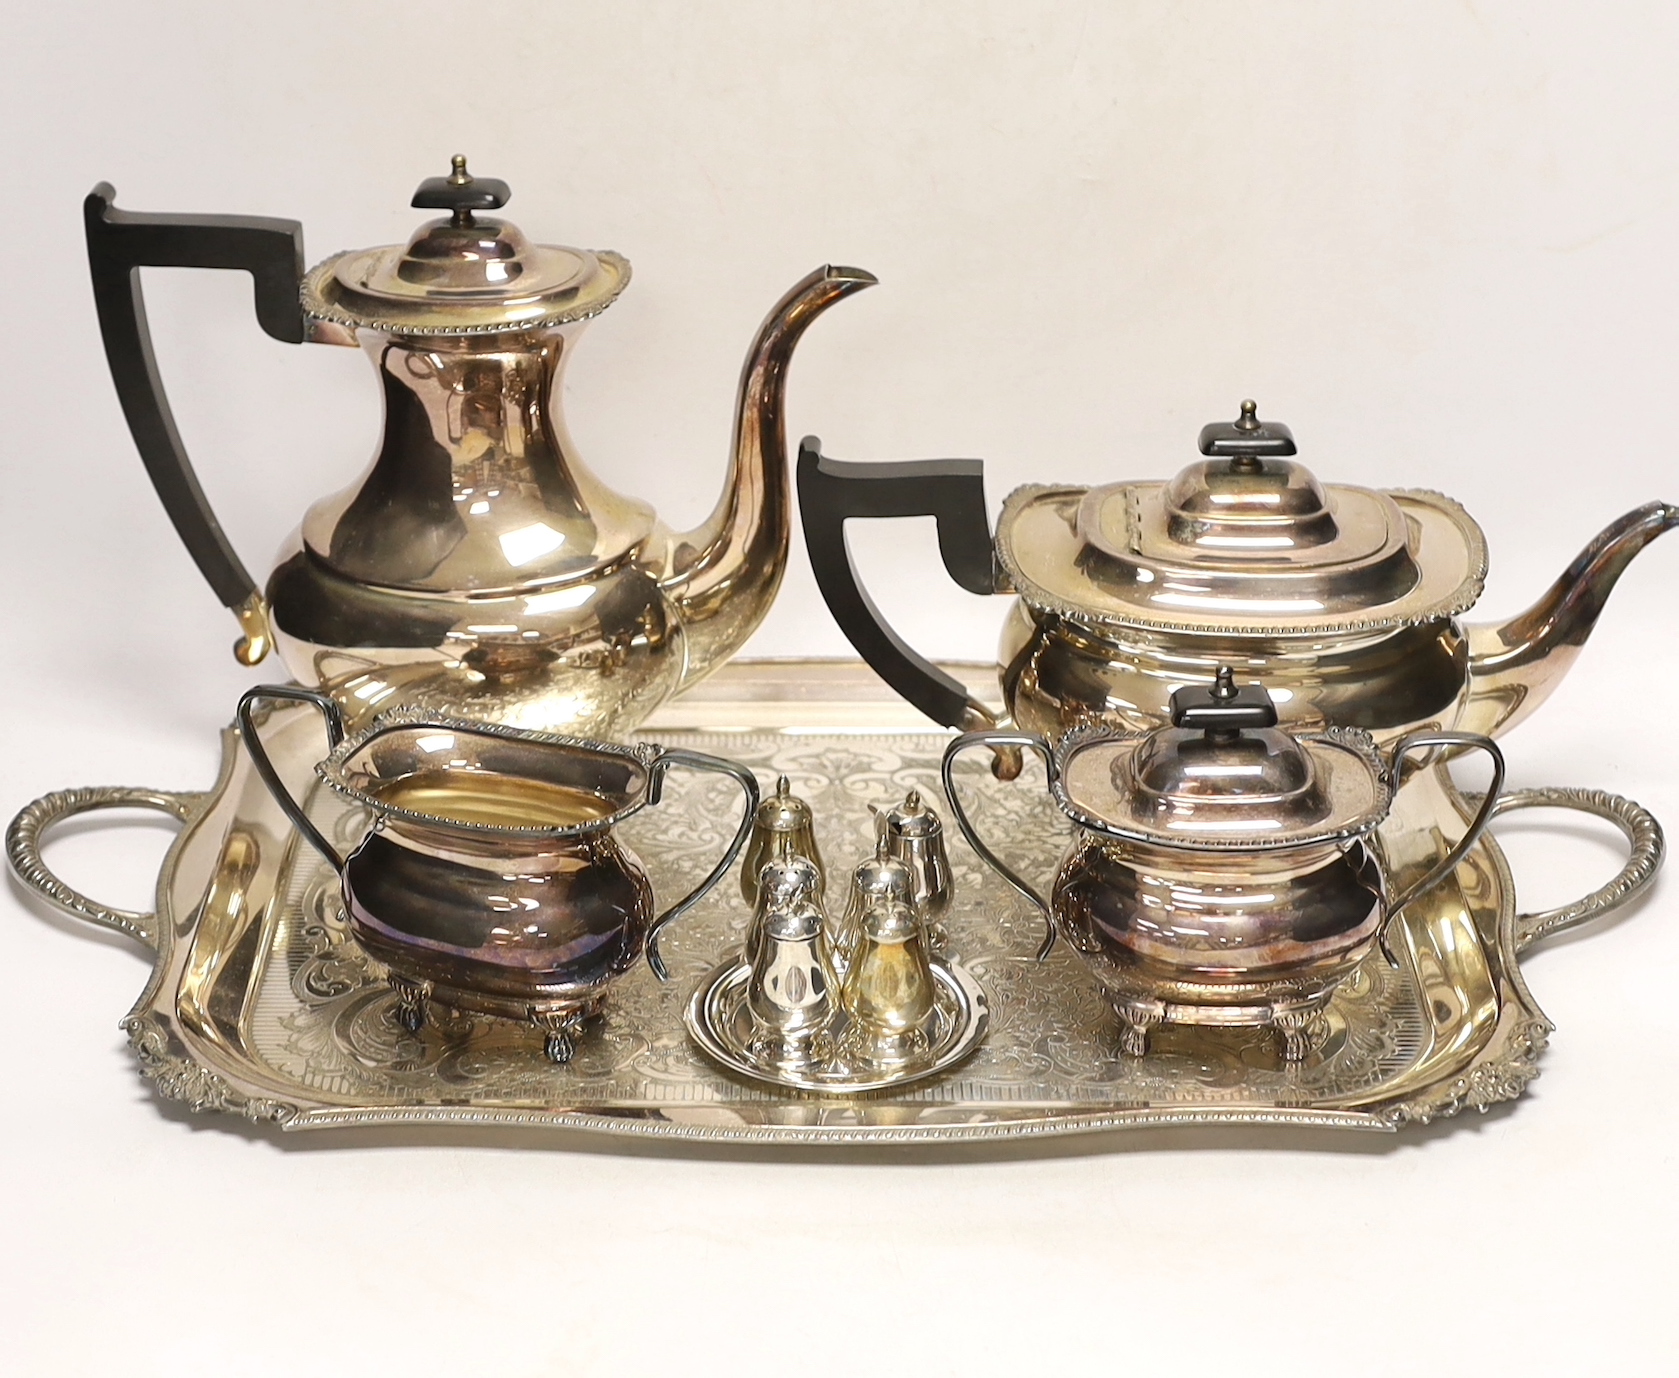 A plated tea / coffee set with ebonised handles and two Sterling condiment sets